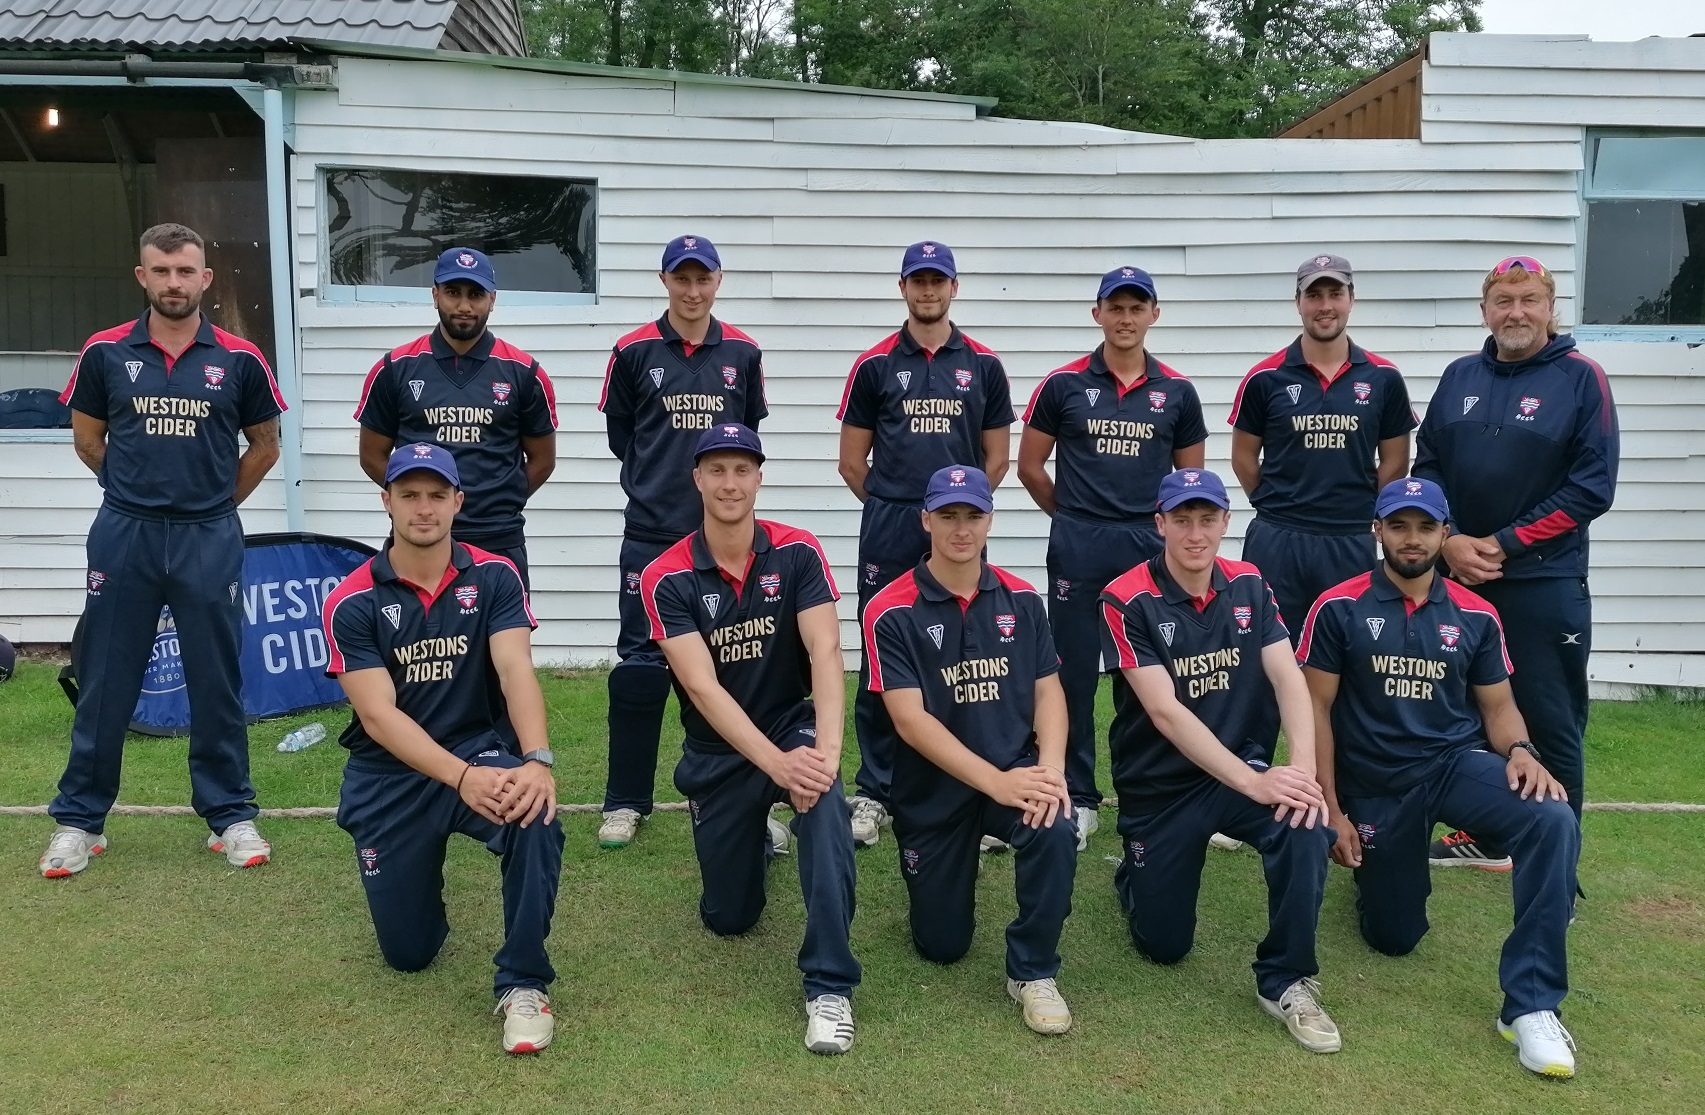 CRICKET | Herefordshire travel to New Road to take on Worcestershire today